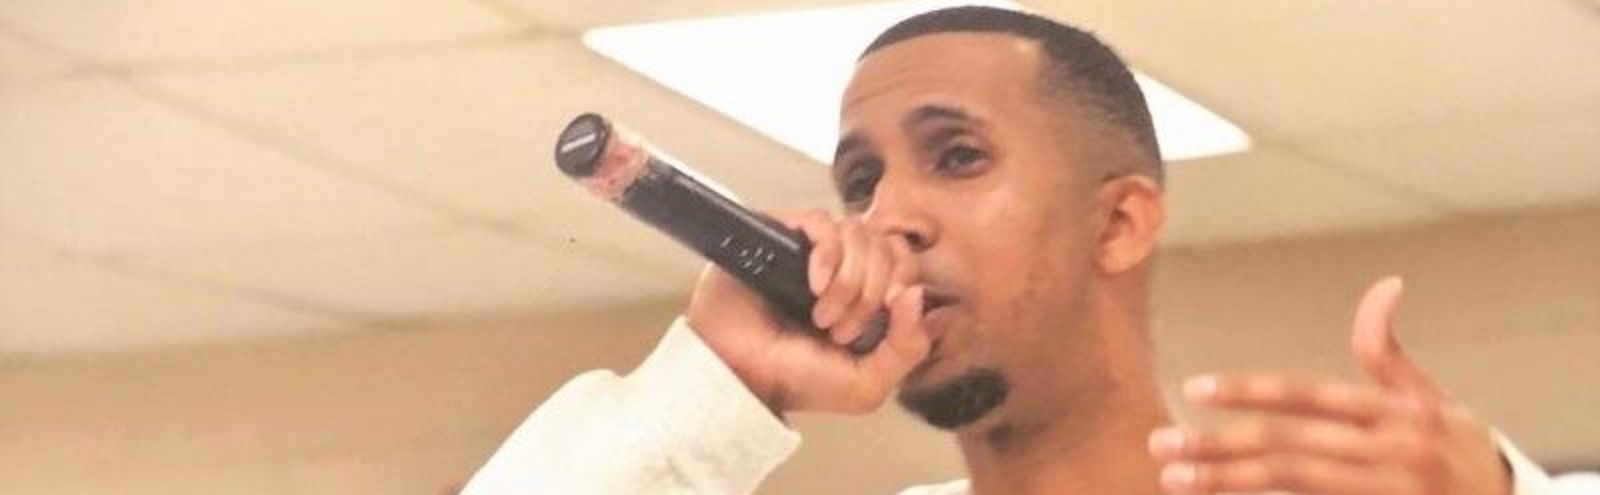 No Limit Rapper Mac Was Granted Clemency After Spending 21 Years In Prison On A Manslaughter Charge